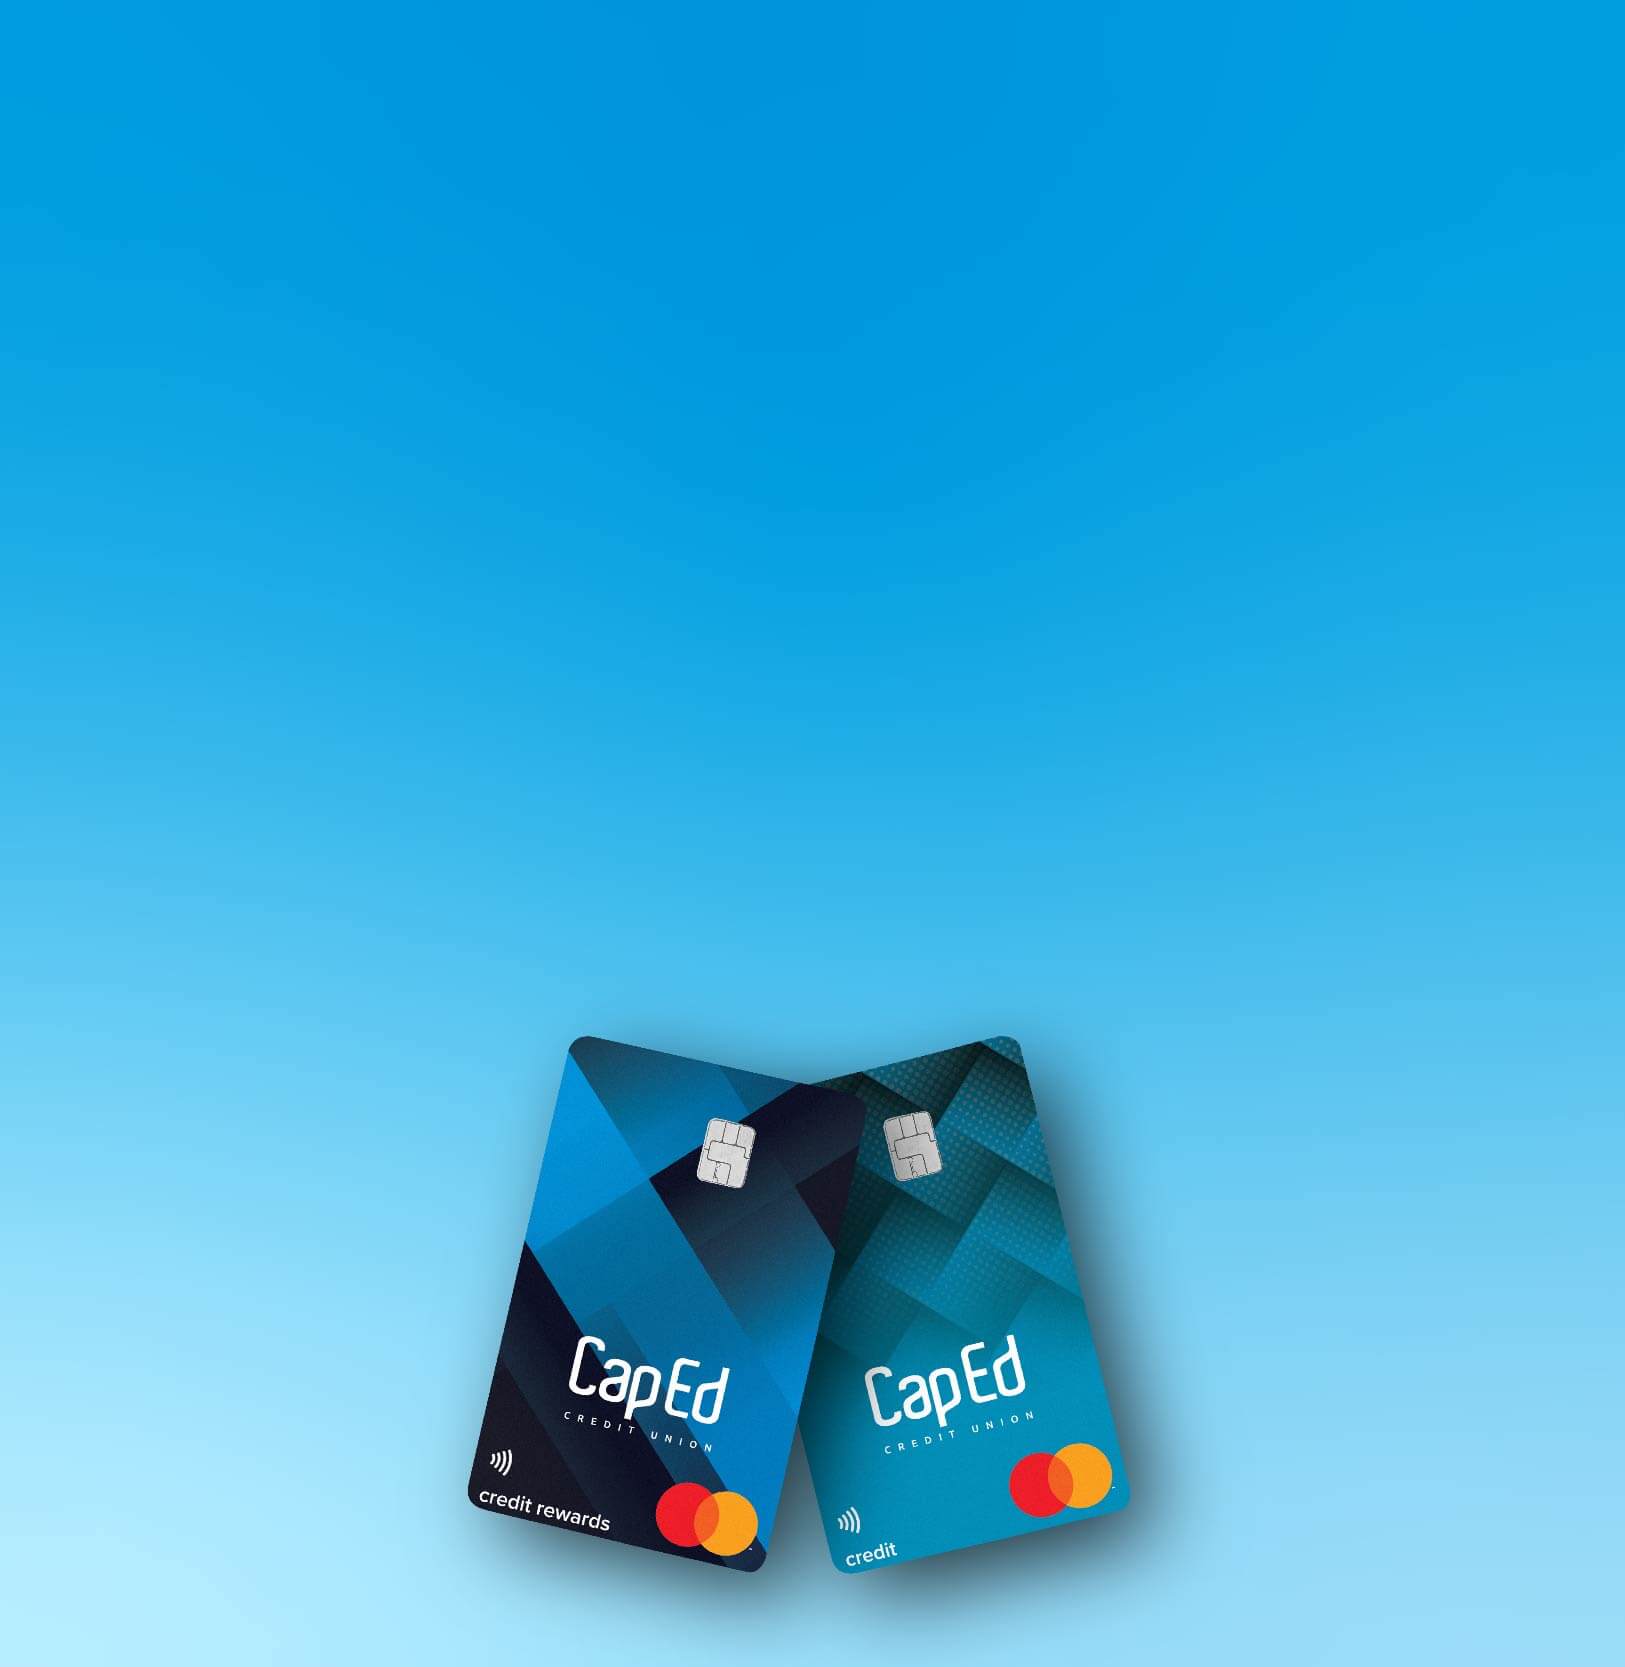 Sample images of a CapEd Rewards Mastercard® as well as a standard CapEd Mastercard.